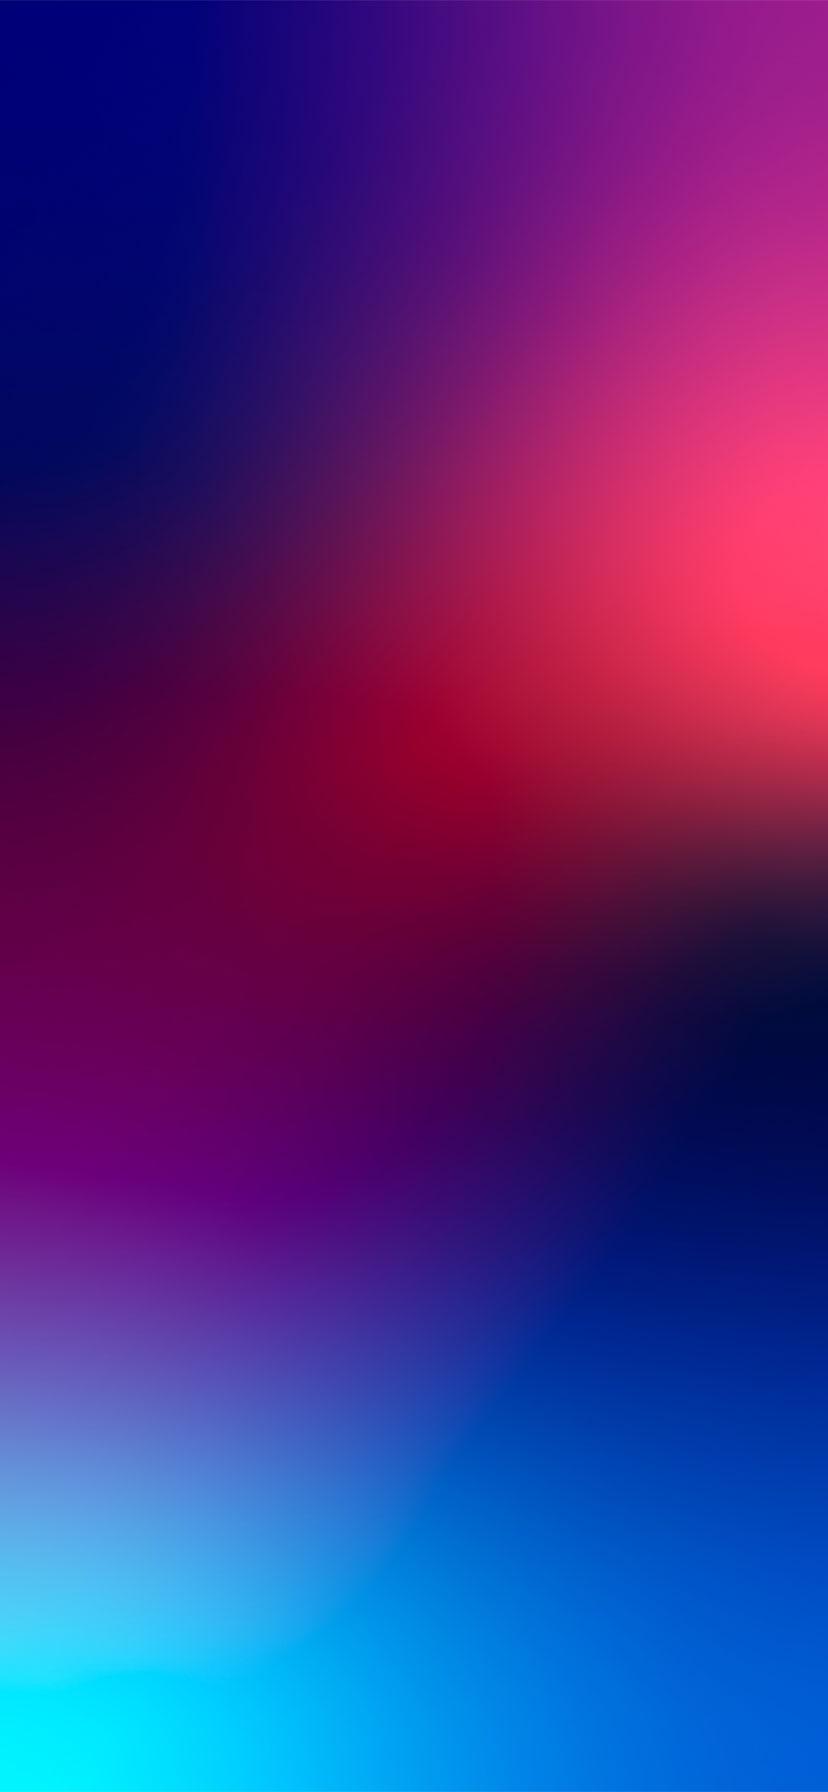 60+ Latest High Quality iPhone 11 Wallpapers & Backgrounds